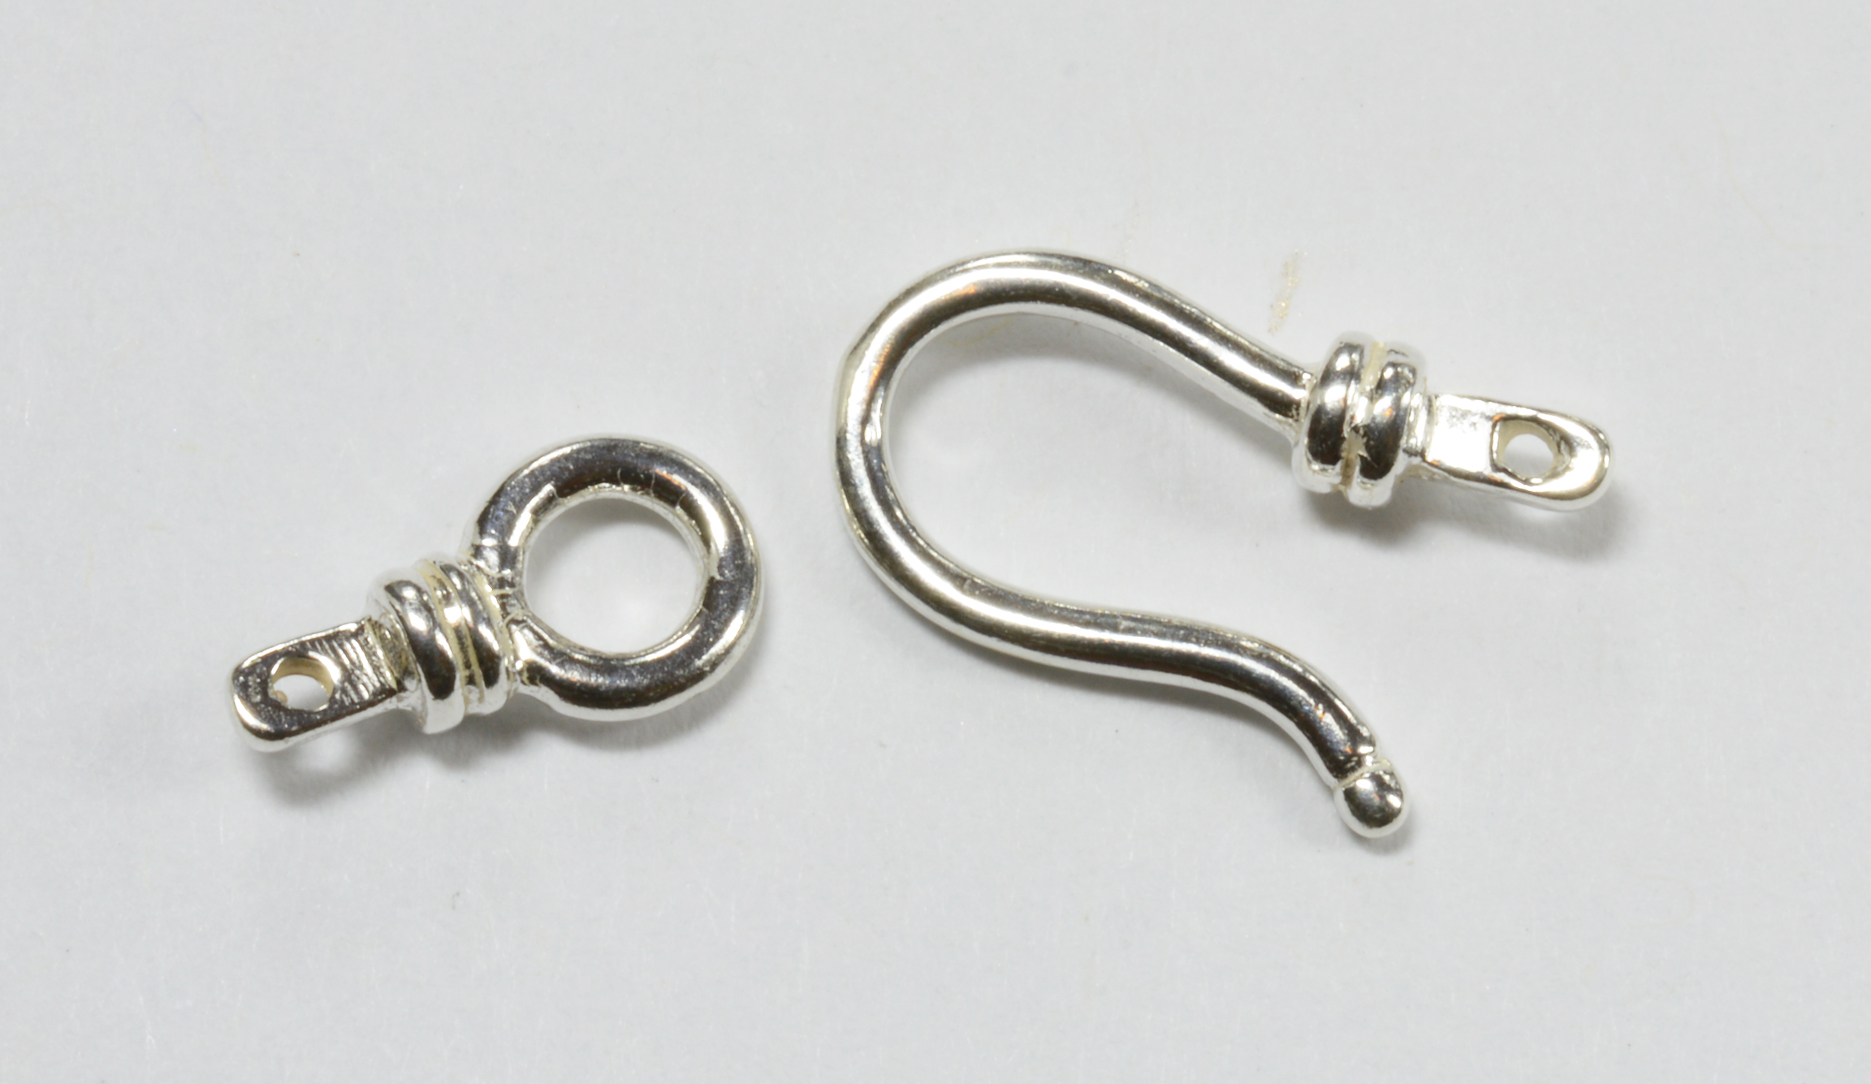 Hook and Eye Clasp with End Caps